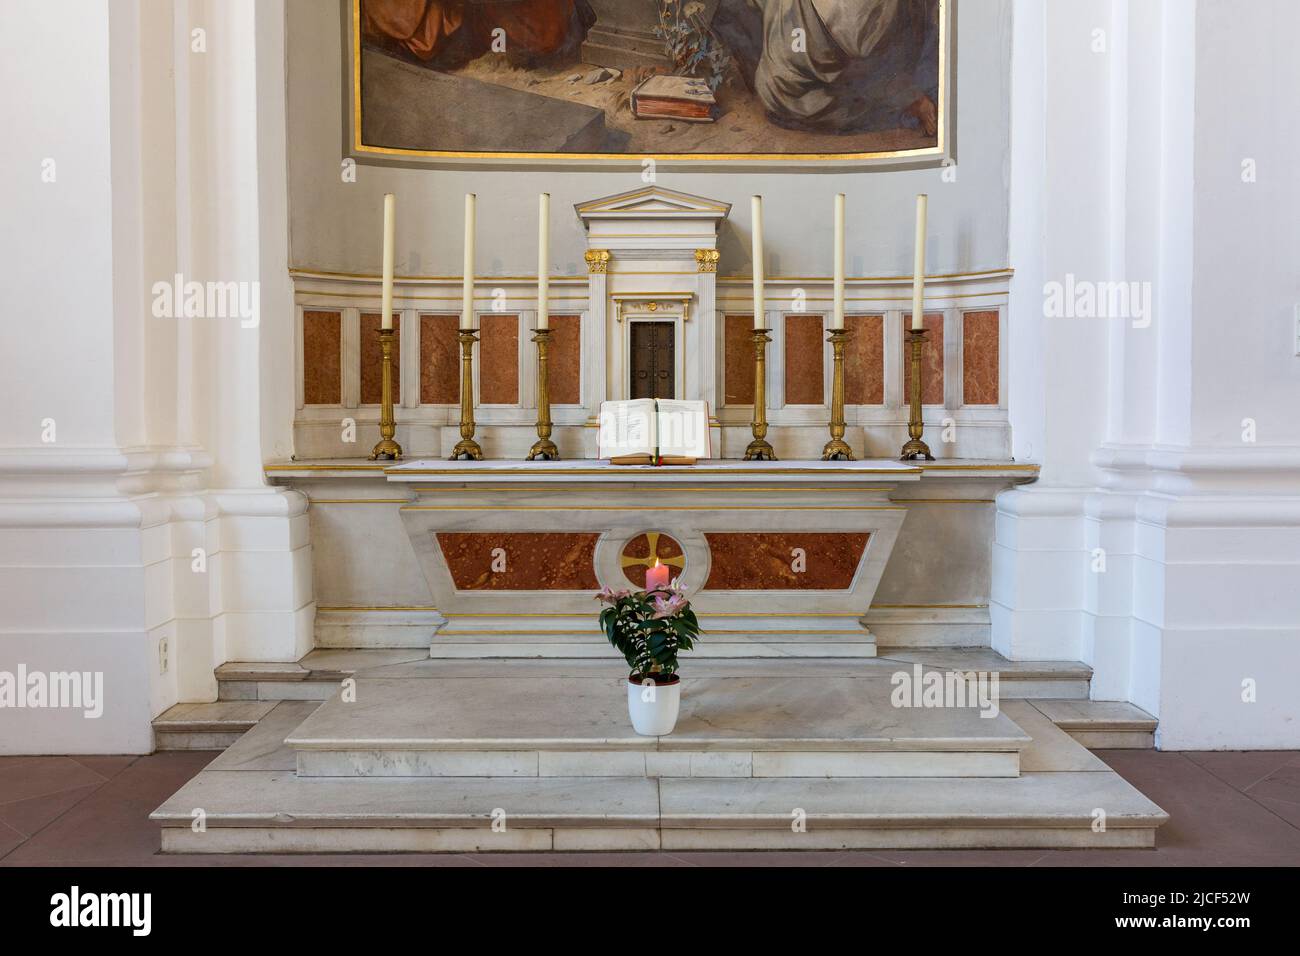 Heidelberg, Germany - Aug 26, 2021: Altar with an open bible and six candles. Inside the catholic church of the Jesuits. Stock Photo